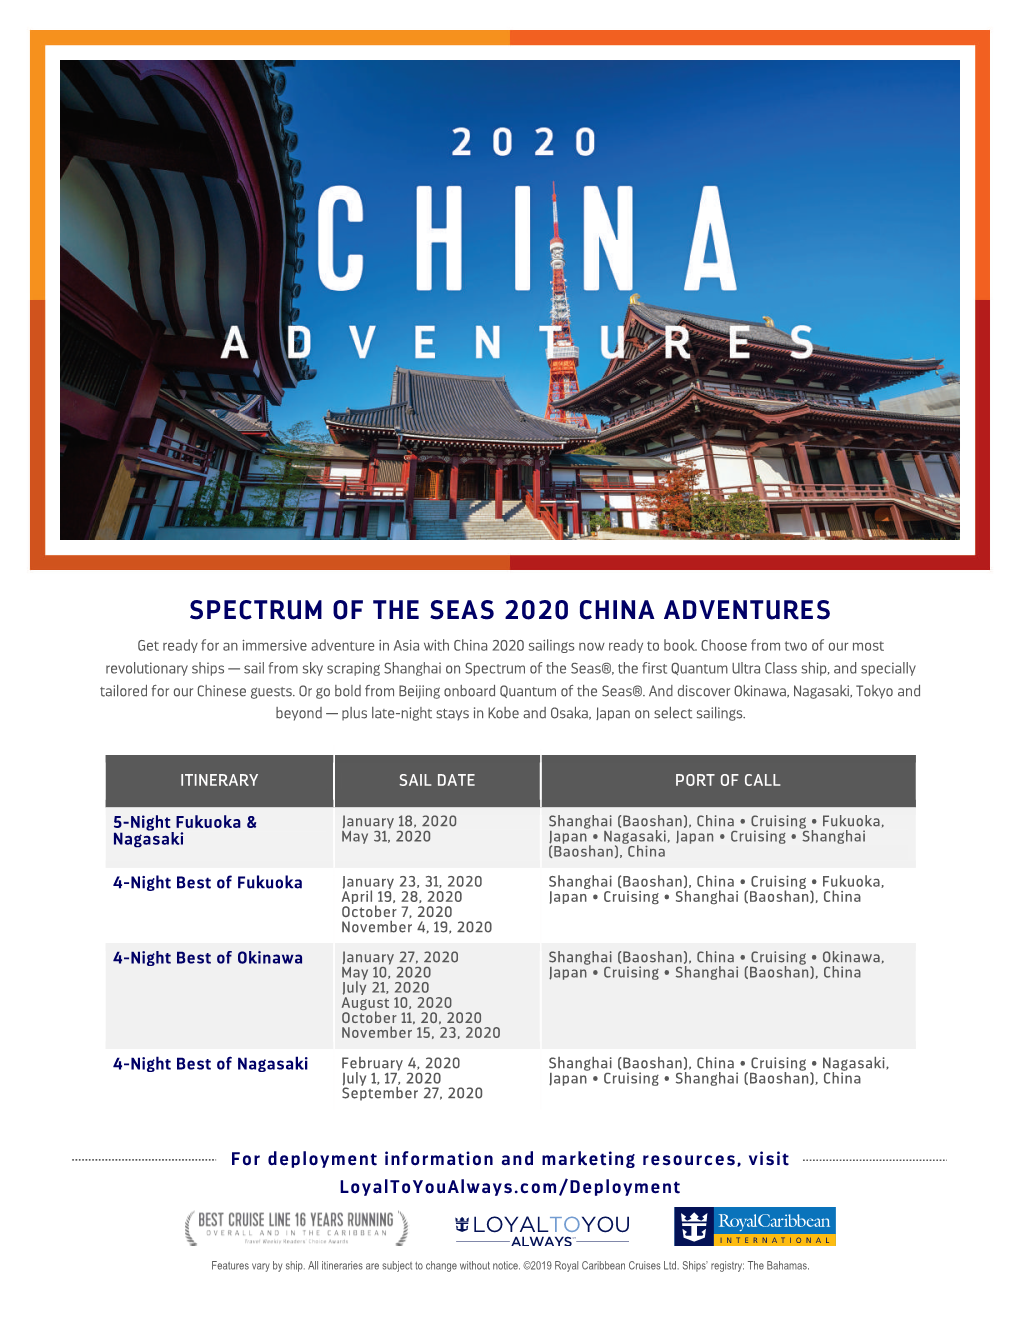 SPECTRUM of the SEAS 2020 CHINA ADVENTURES Get Ready for an Immersive Adventure in Asia with China 2020 Sailings Now Ready to Book